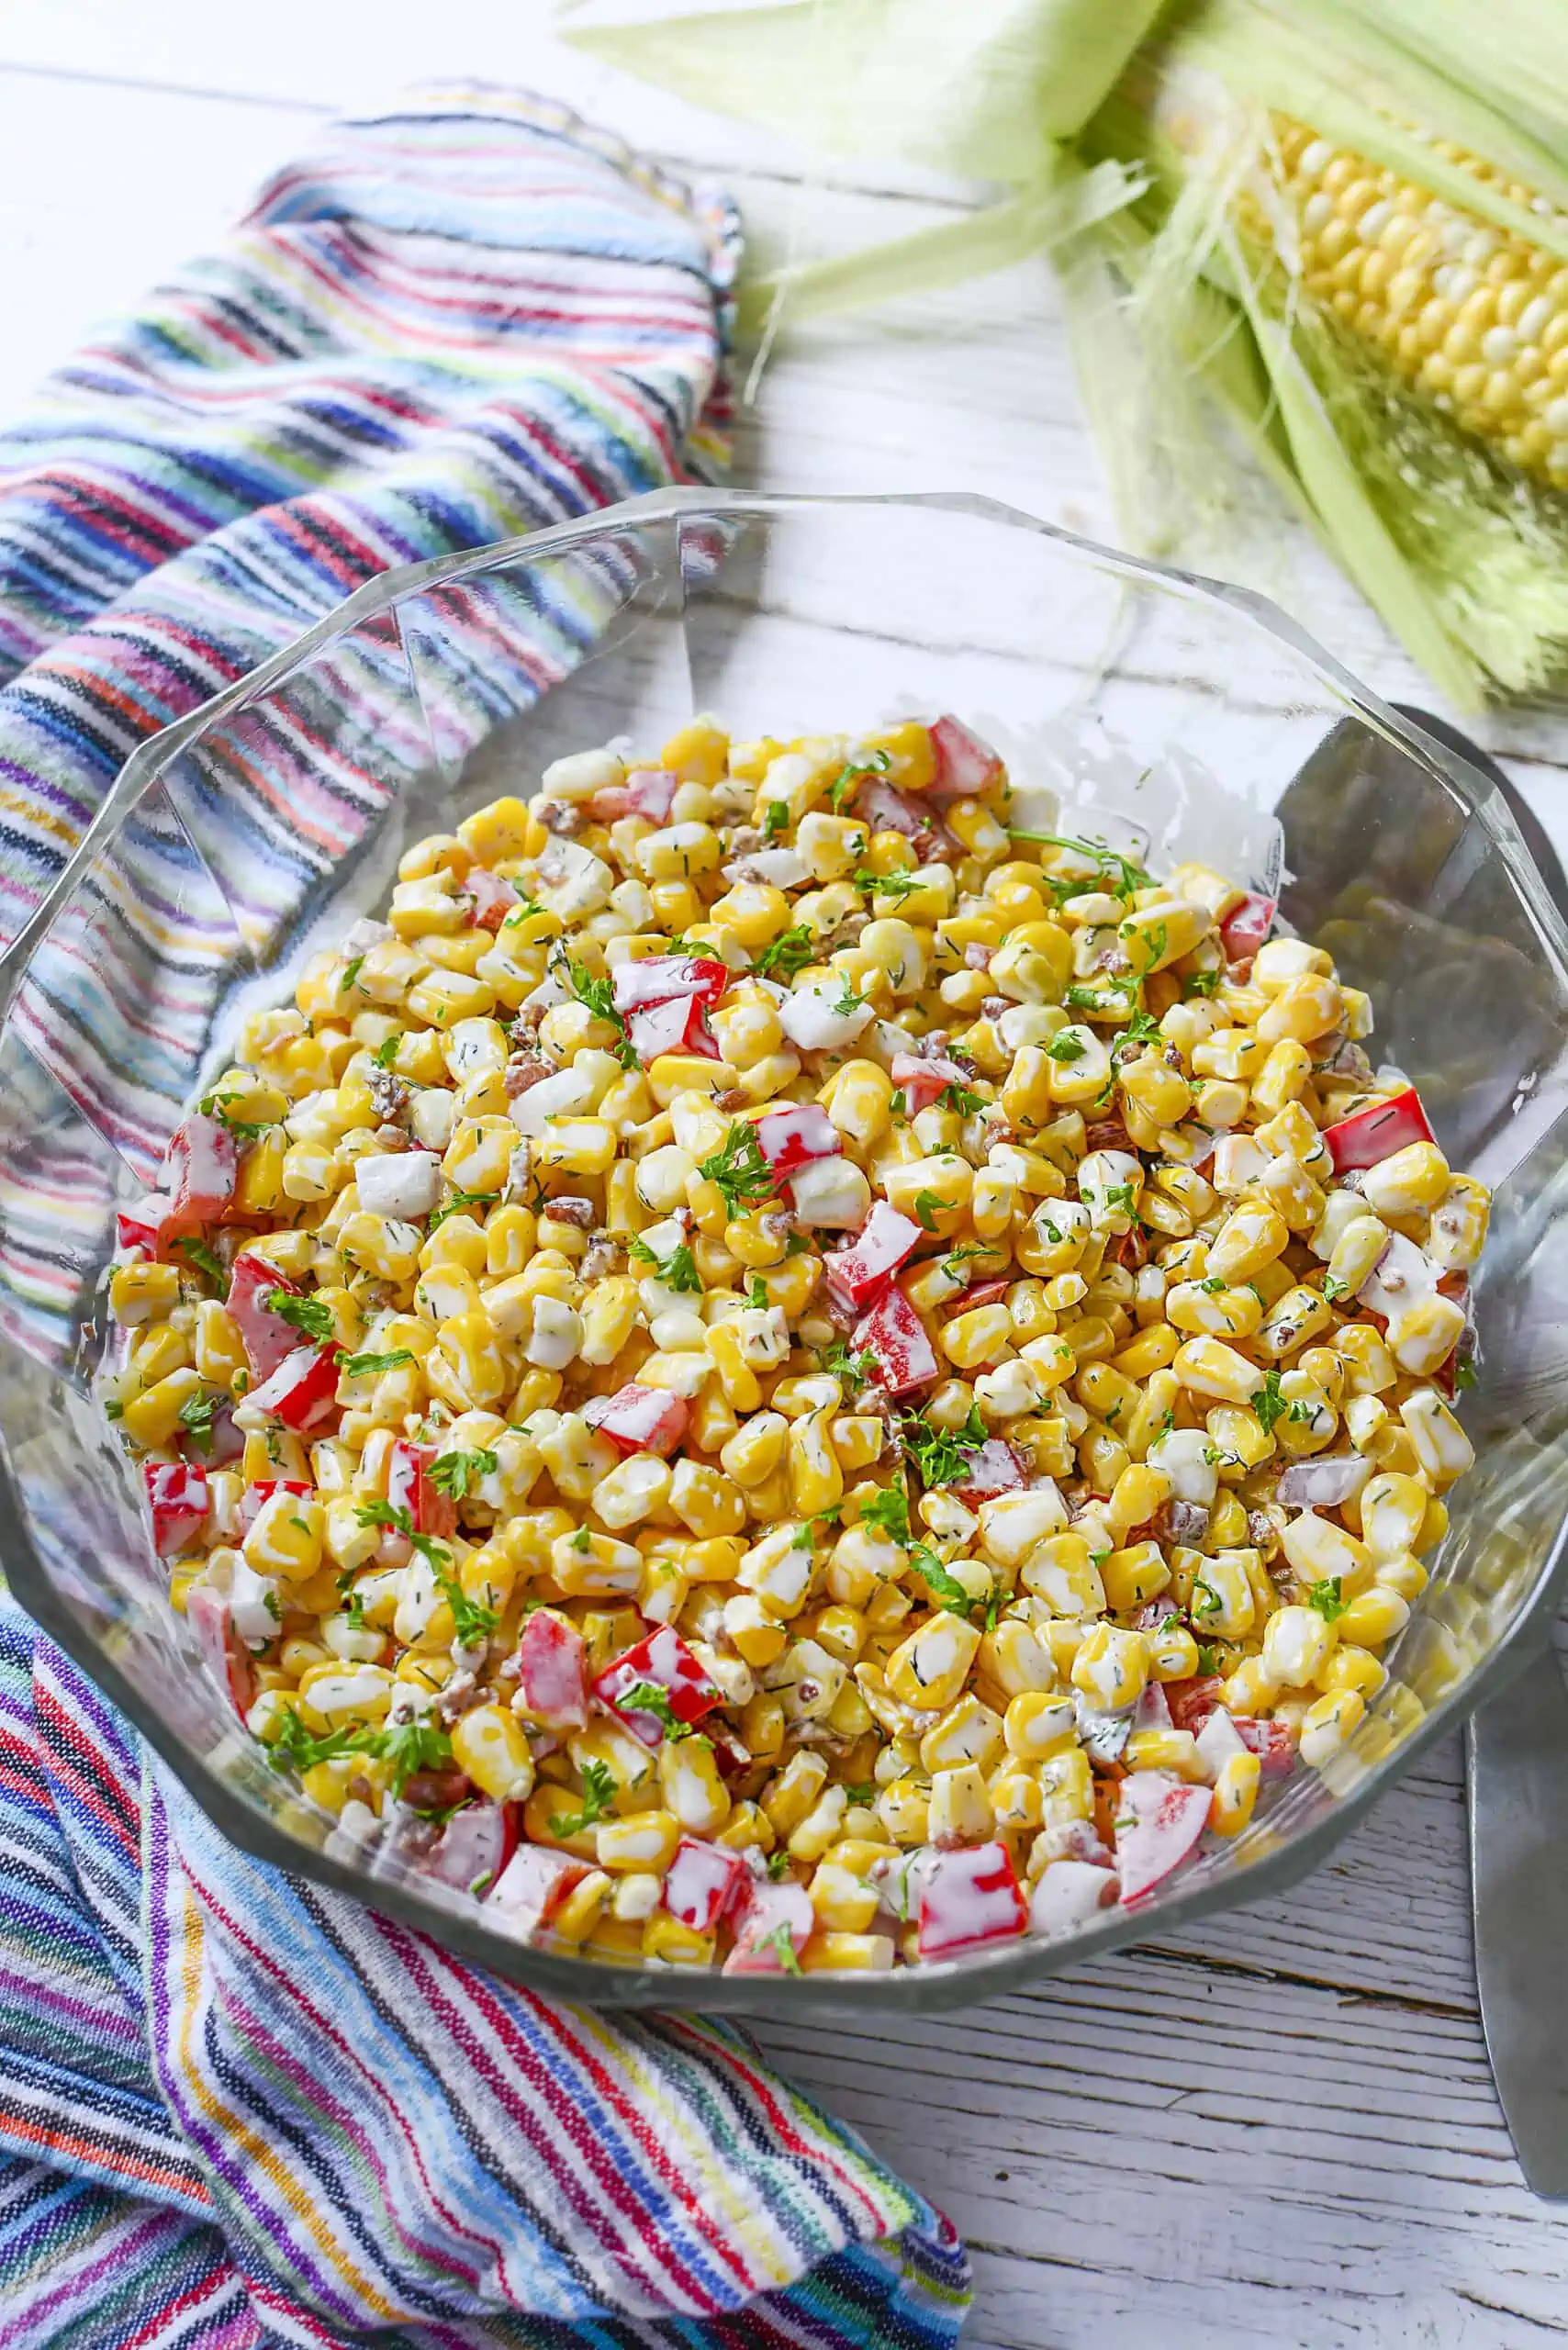 Corn salad in a glass bowl with a silver serving spoon next to it. On the left is a colorful striped napkin.